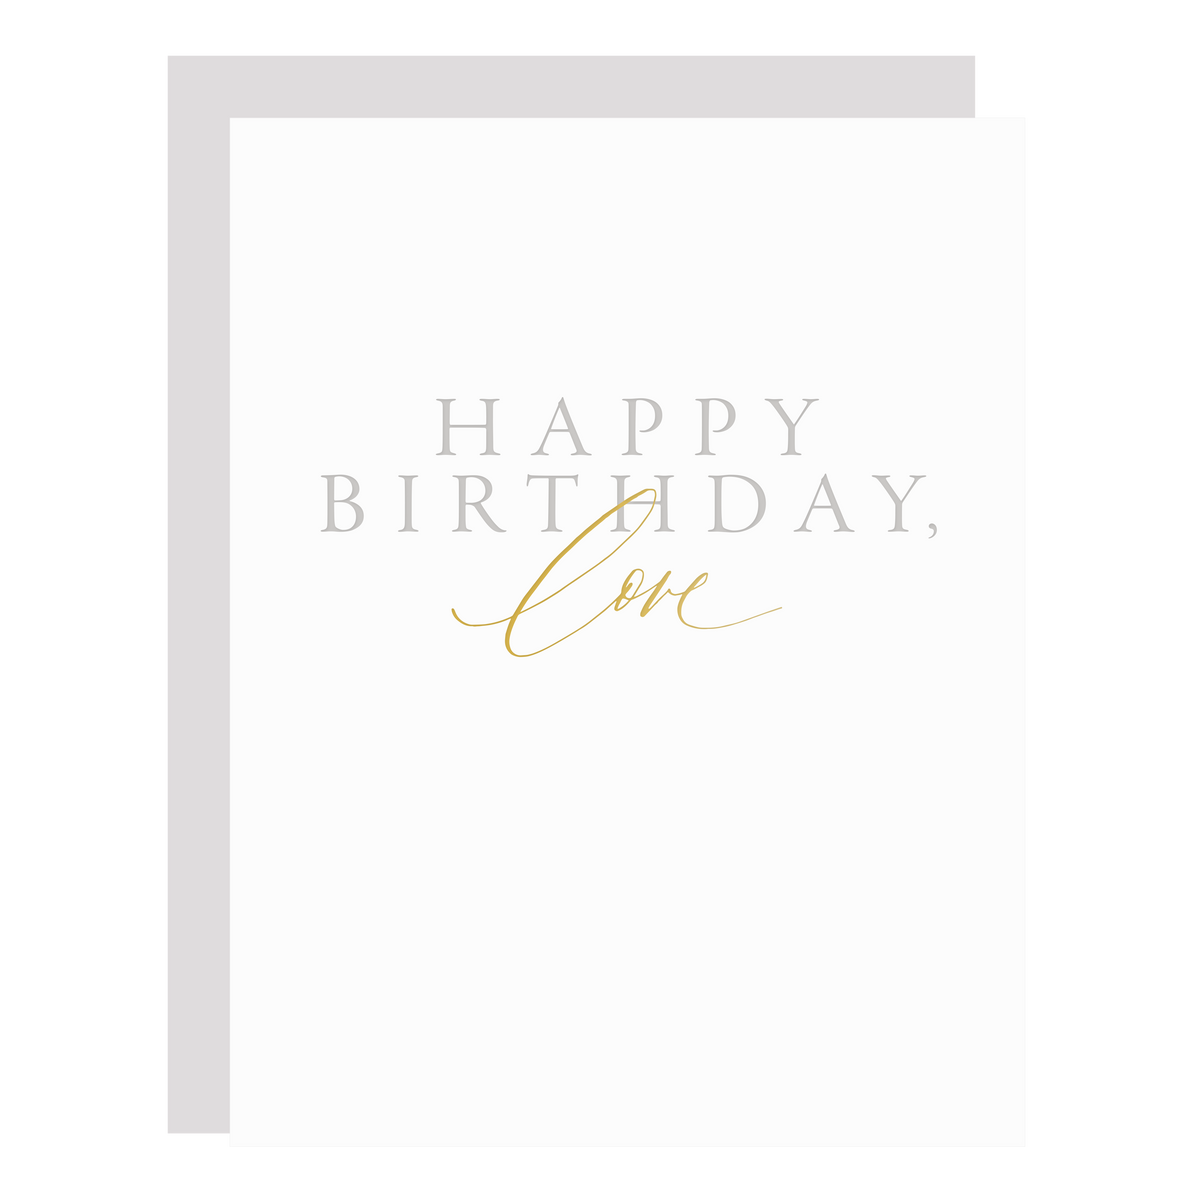 &quot;Happy Birthday, Love&quot; birthday card, letterpress printed by hand in pale grey ink and gold foil. 